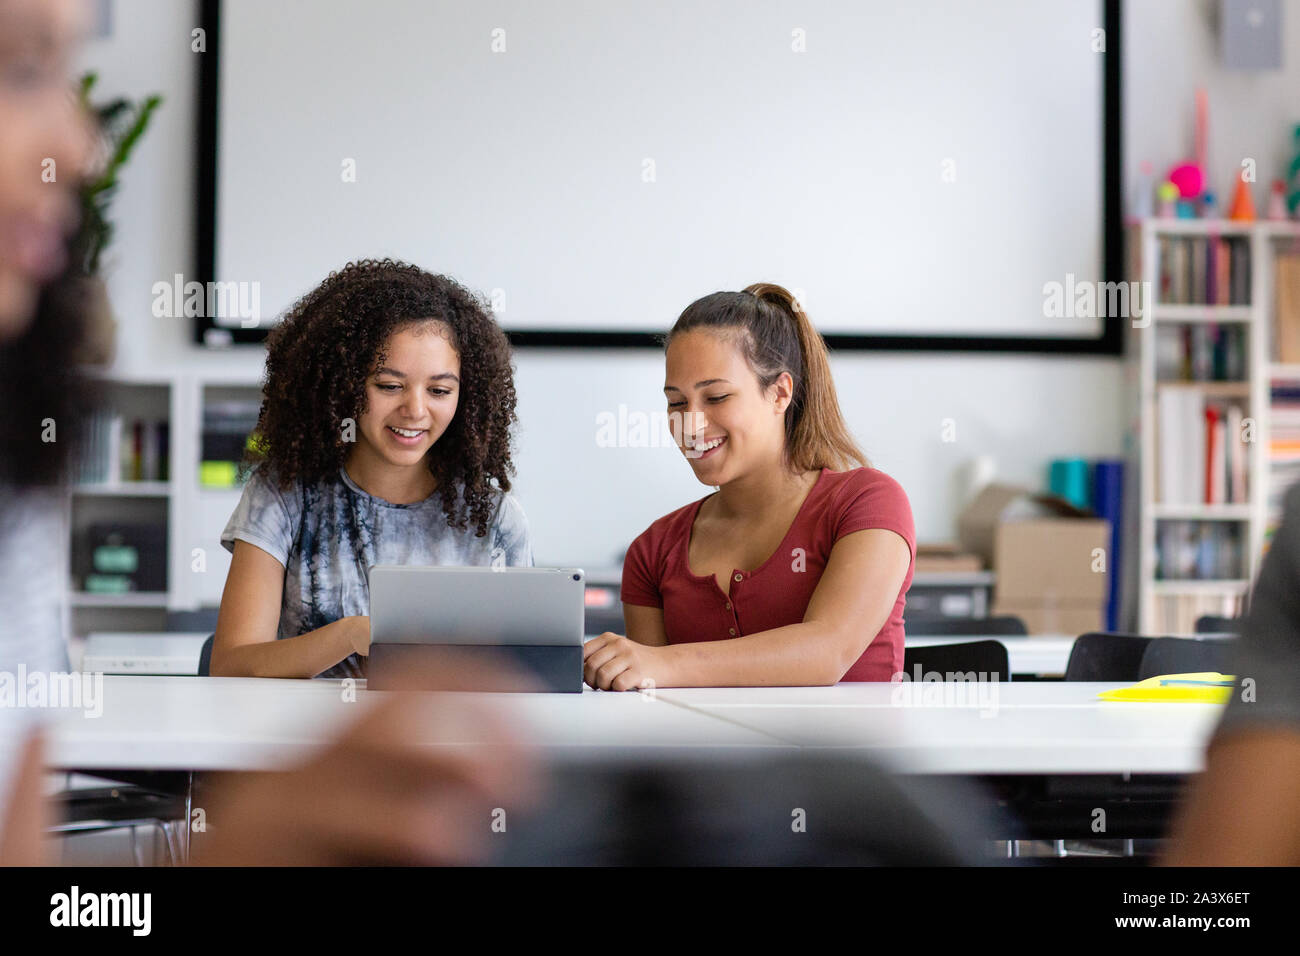 High school female students studying with digital tablet Stock Photo